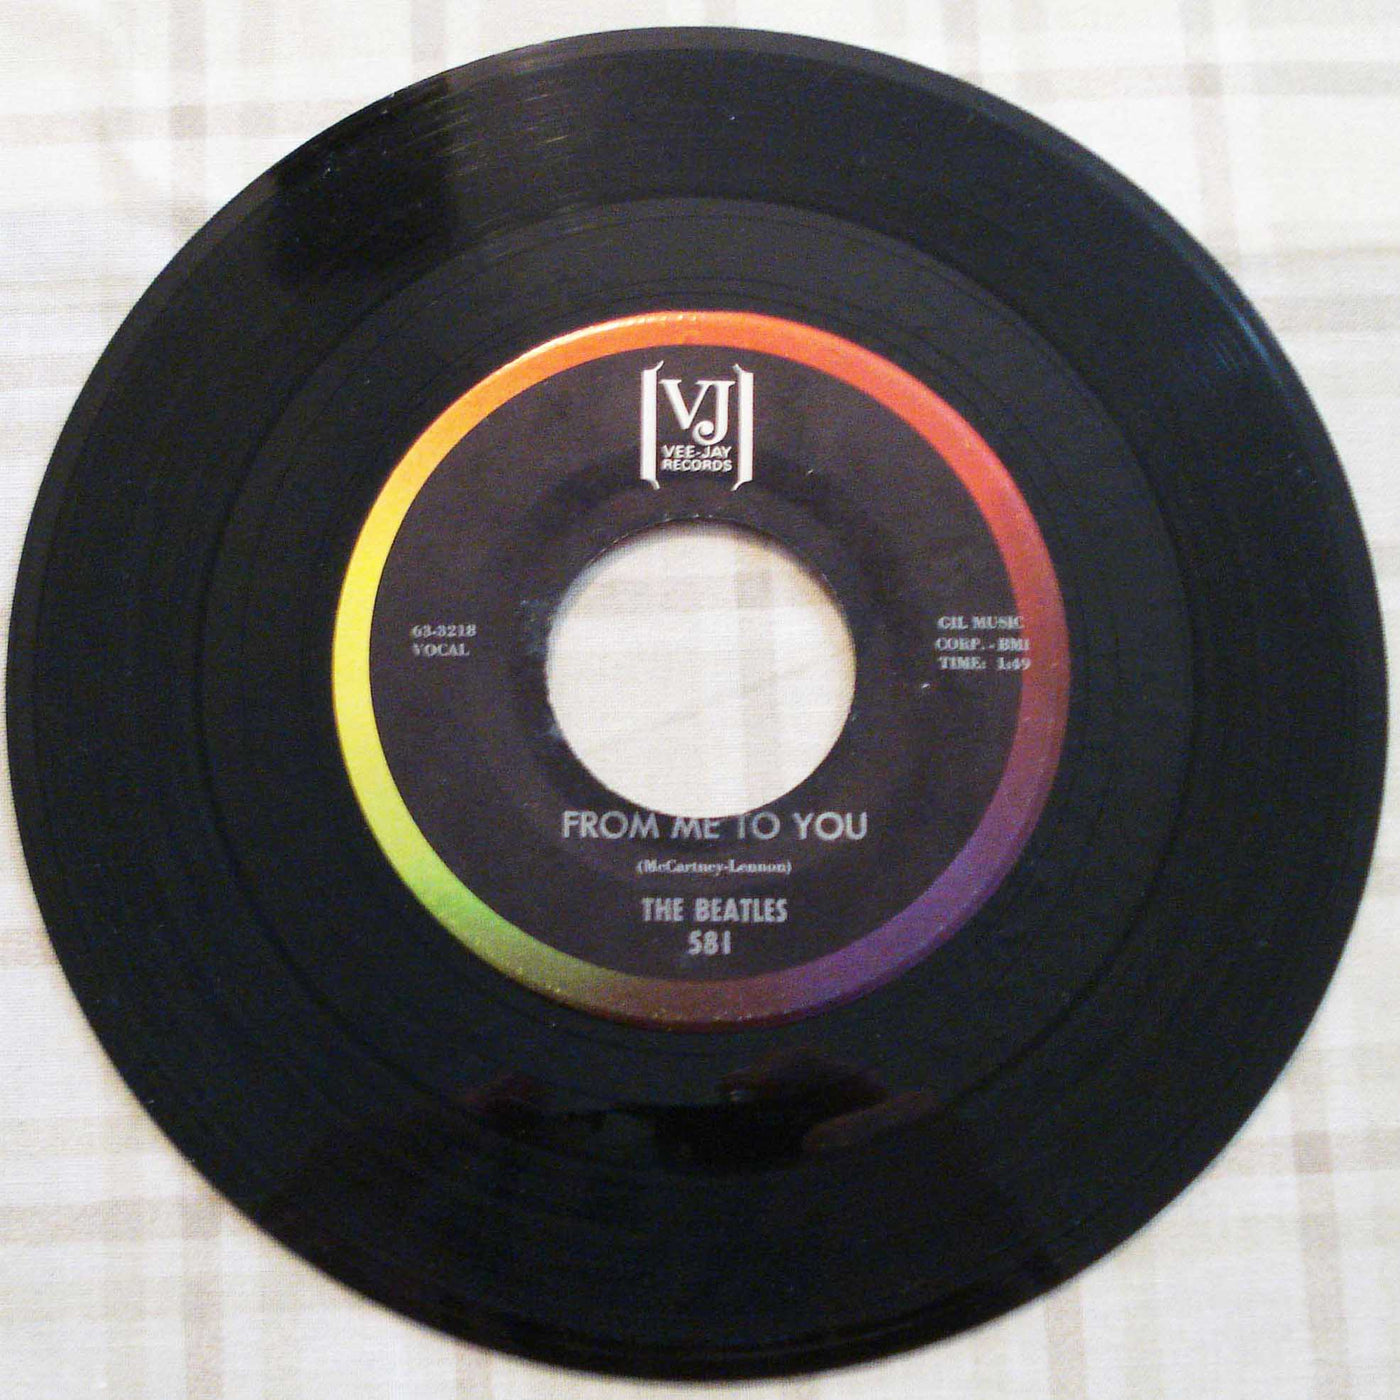 The Beatles-'Beattles' From Me To You-Thank You Girl (DJ Advance Copy) Vinyl Single 45rpm 63-3218